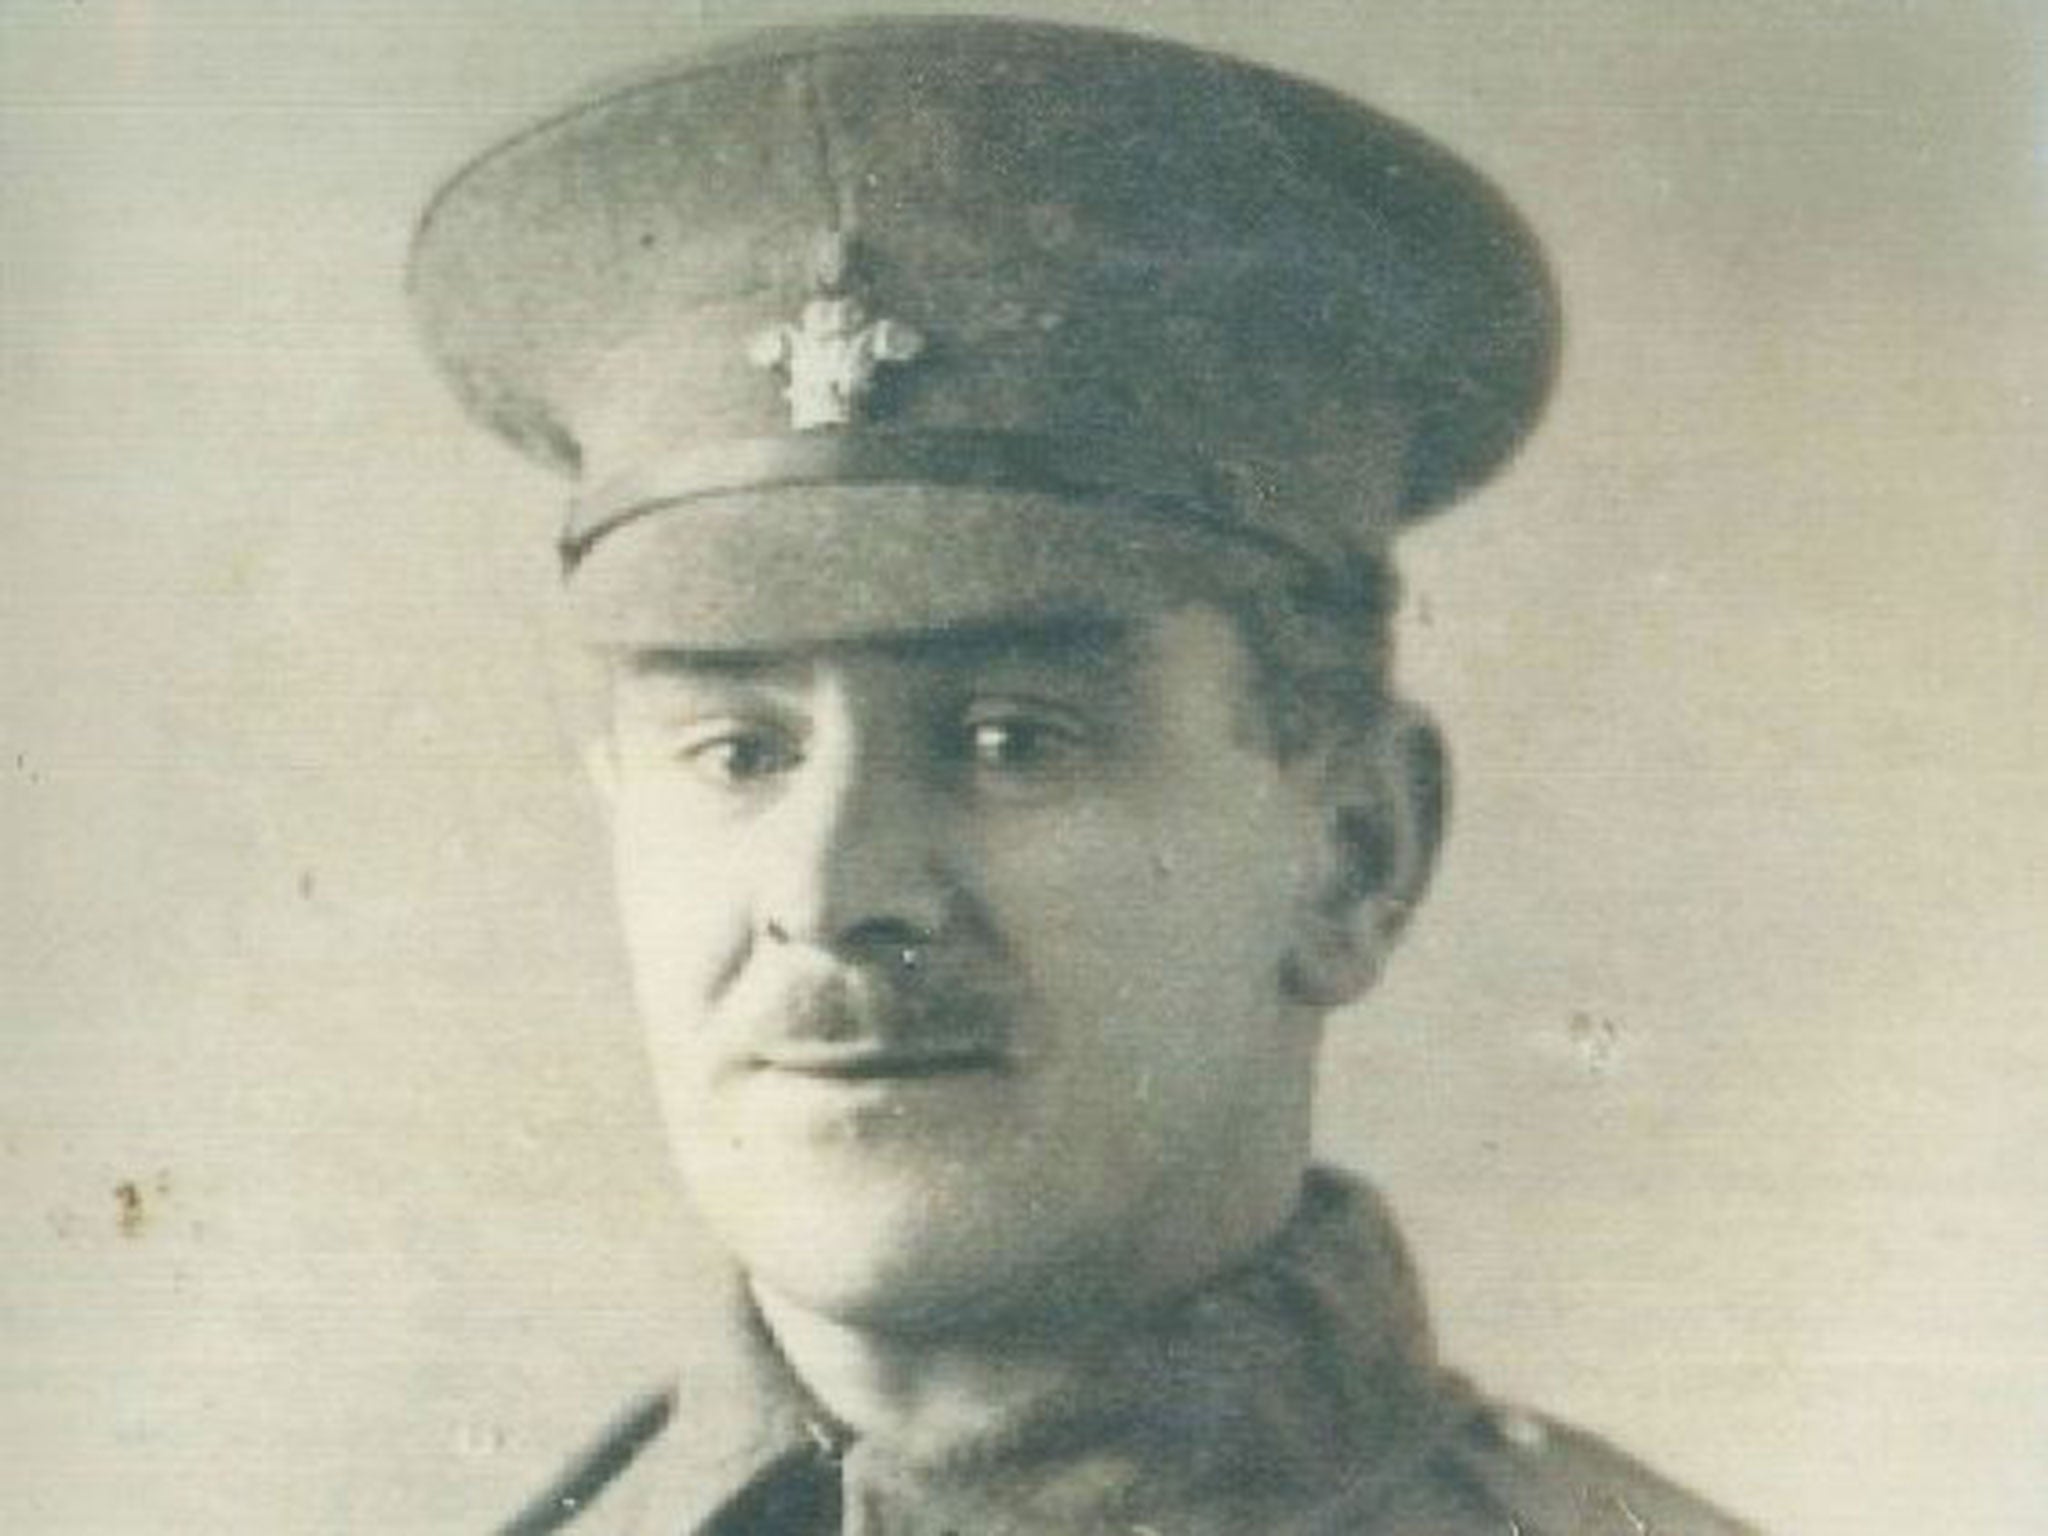 Frederick James Davies was a private in the 2nd Battalion Royal Welsh Fusiliers